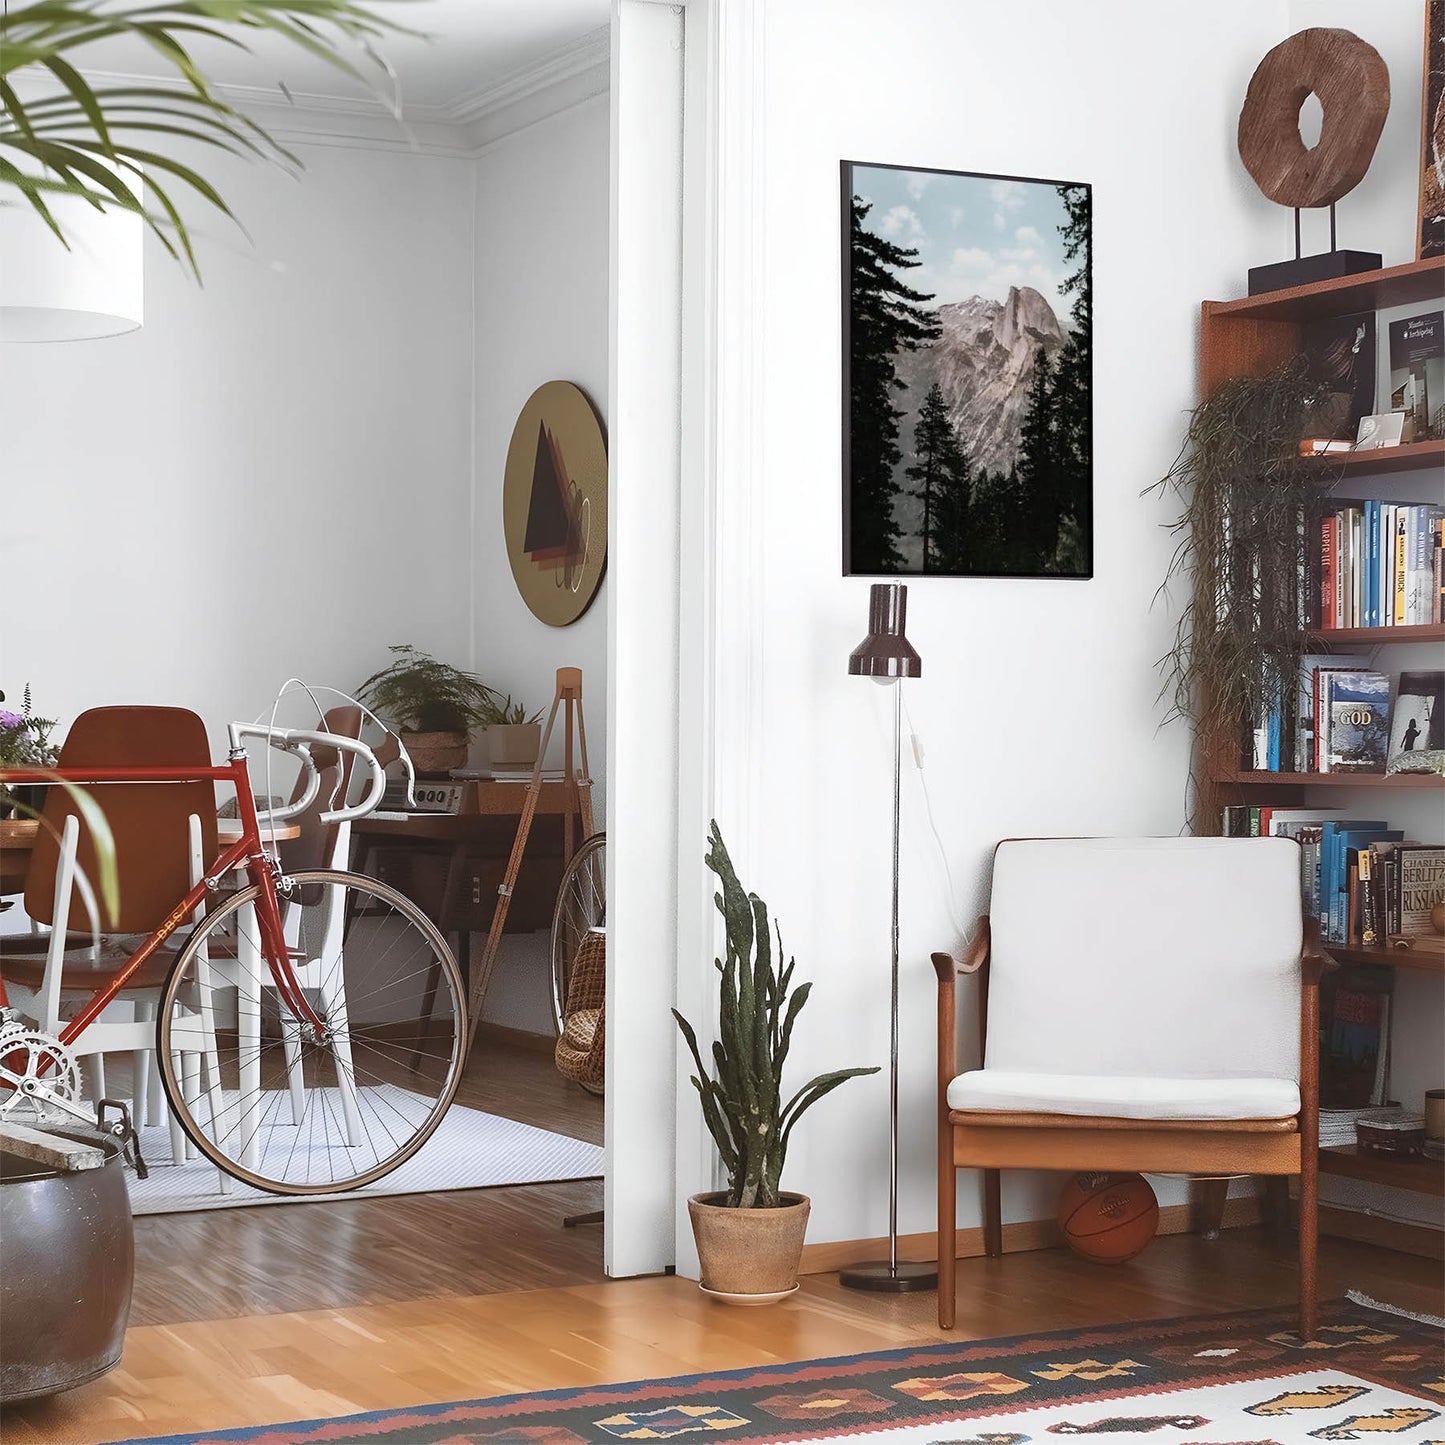 Eclectic living room with a road bike, bookshelf and house plants that features framed artwork of a Vintage Yosemite Valley National Park above a chair and lamp